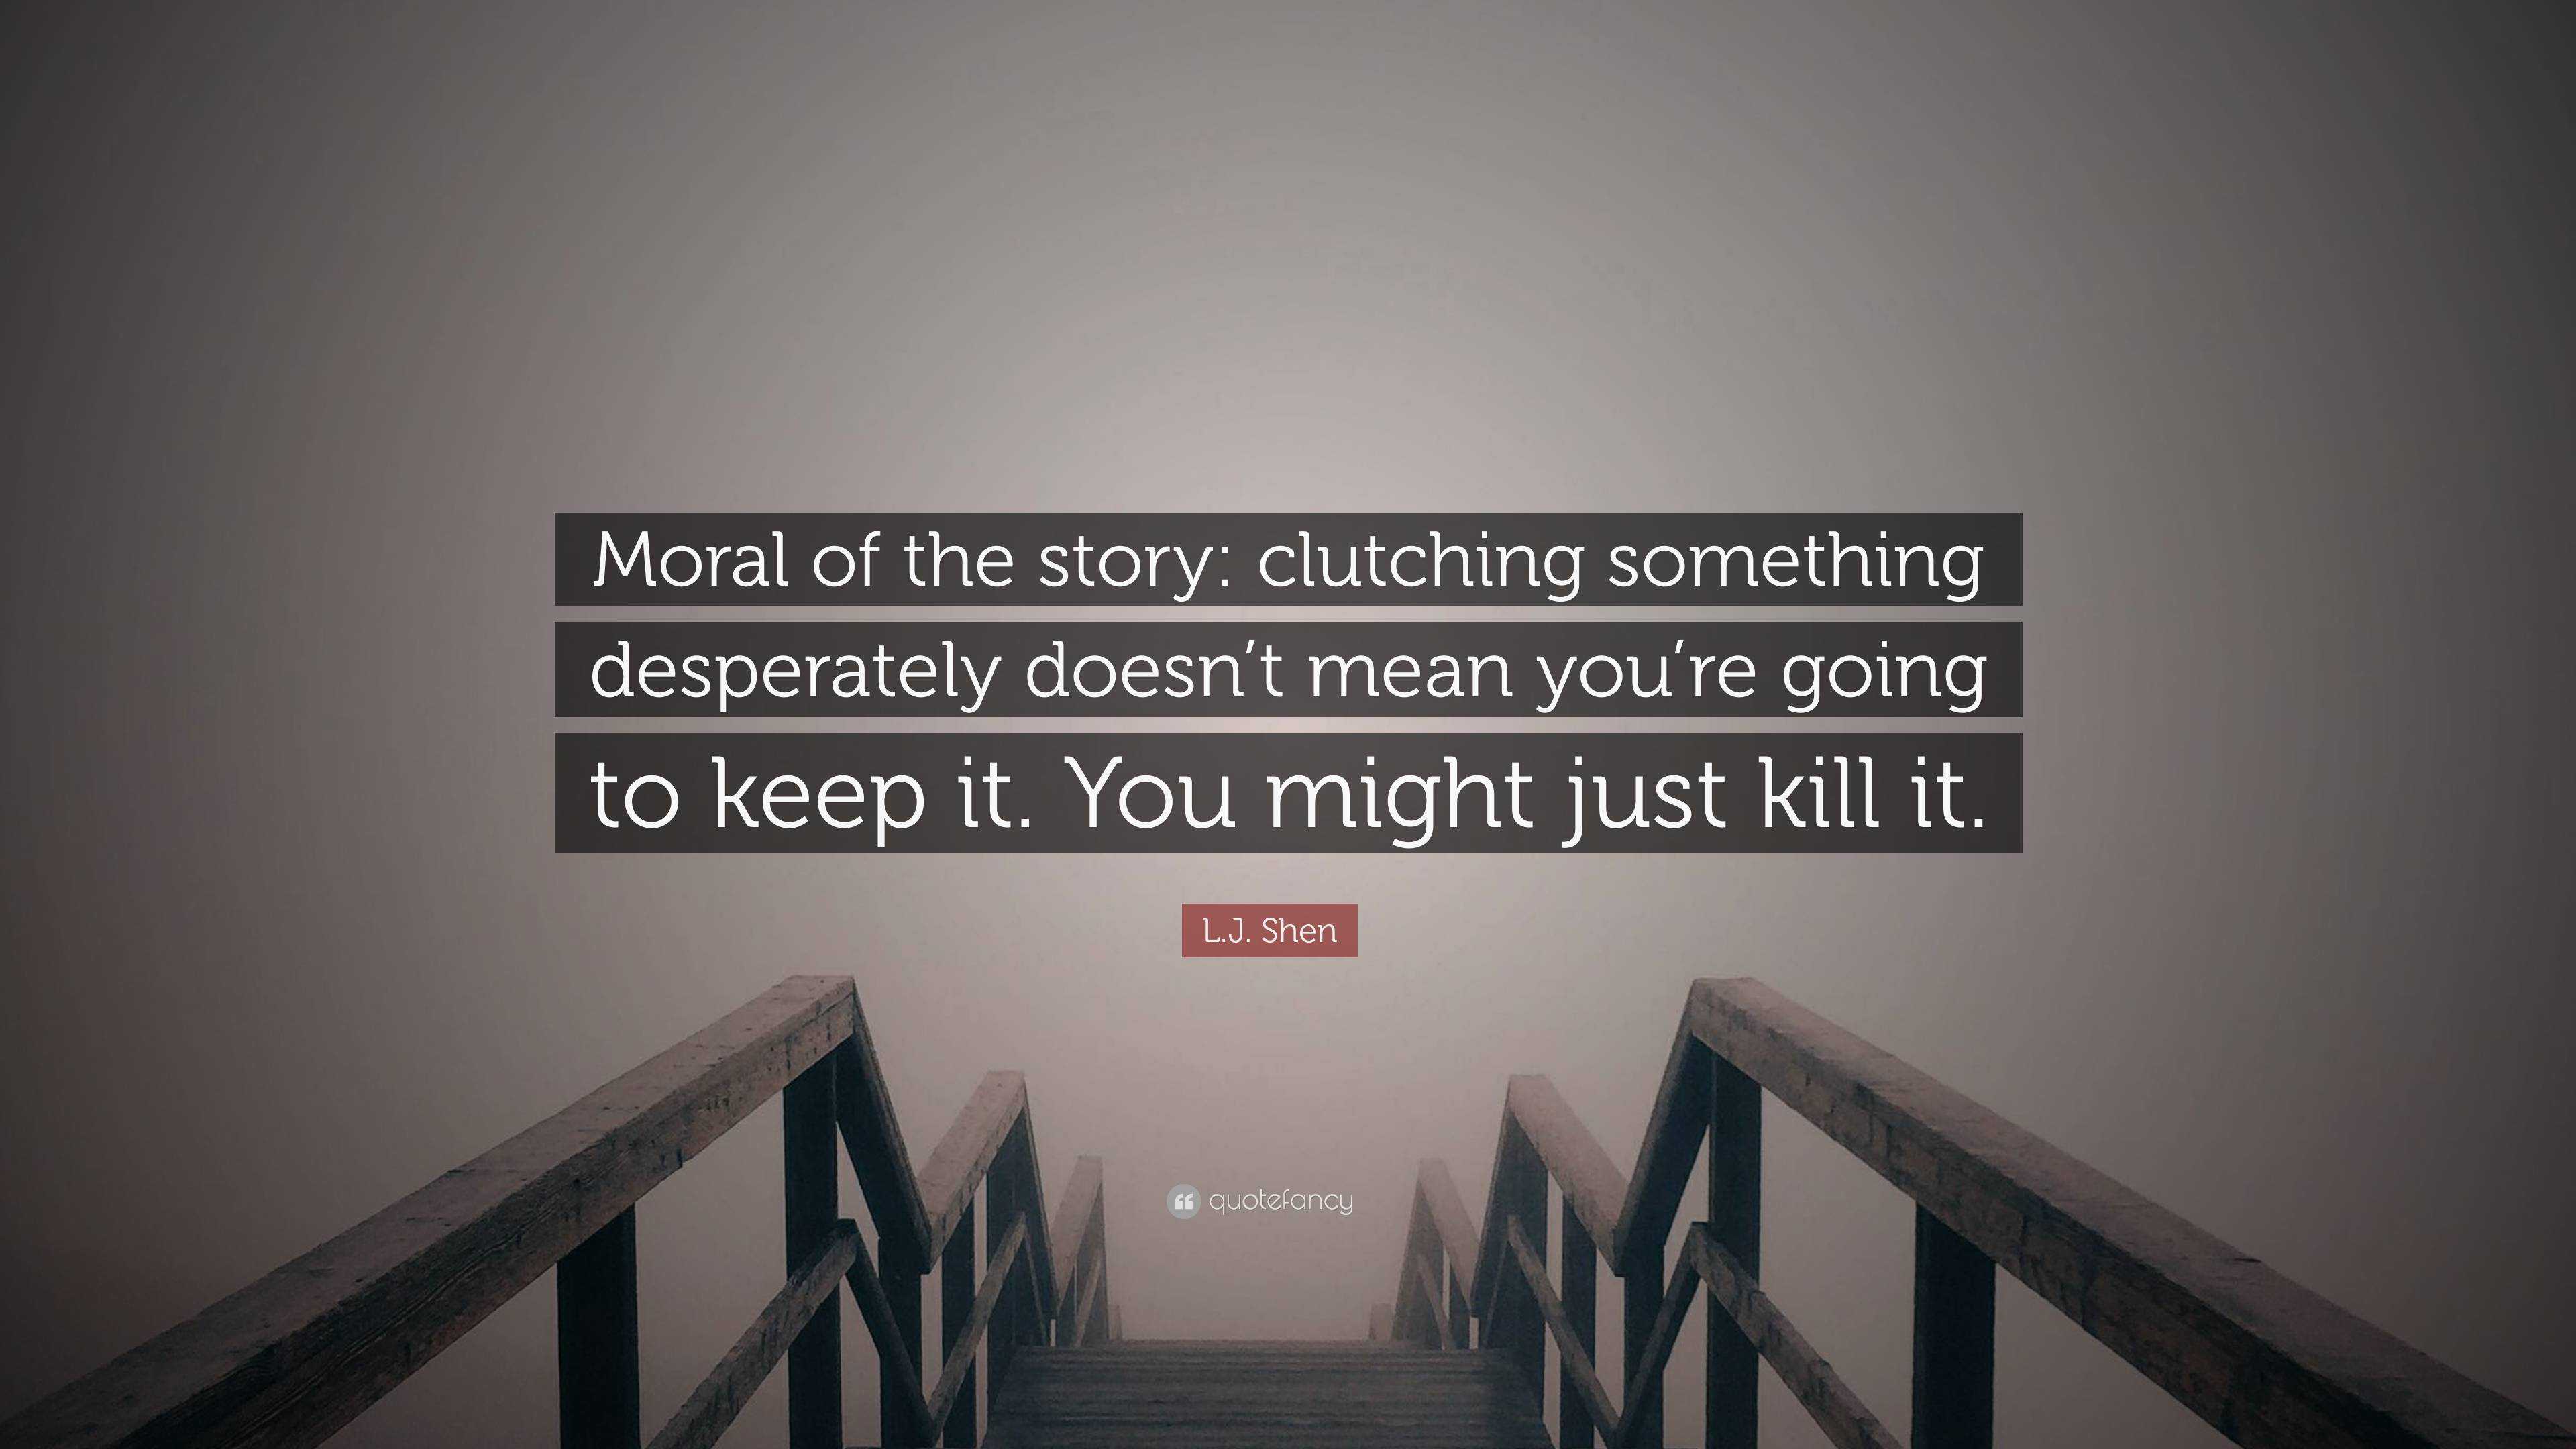 L.J. Shen Quote: “Moral of the story: clutching something desperately  doesn't mean you're going